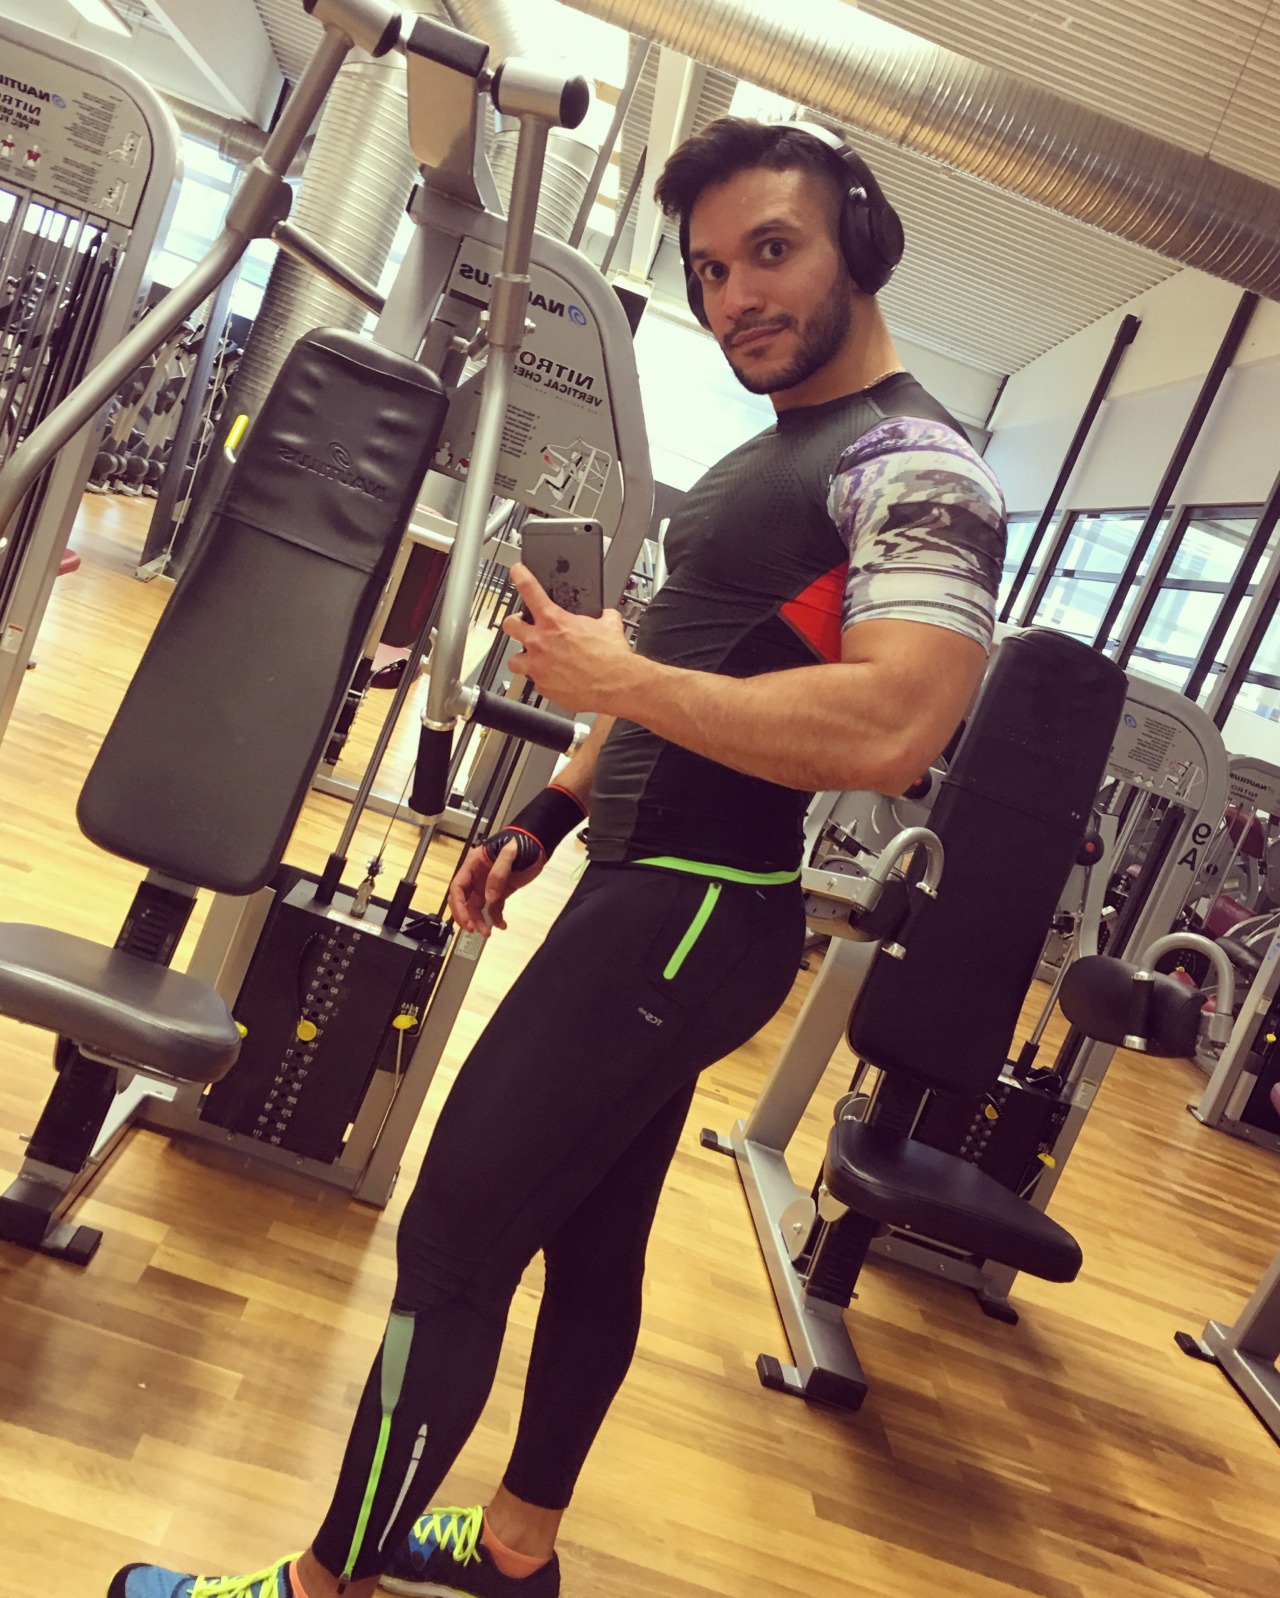 lyon8668:  Killing my arms today 💪🏼😝 Yessss!!! They are ON FIRE 💪🏼🔥